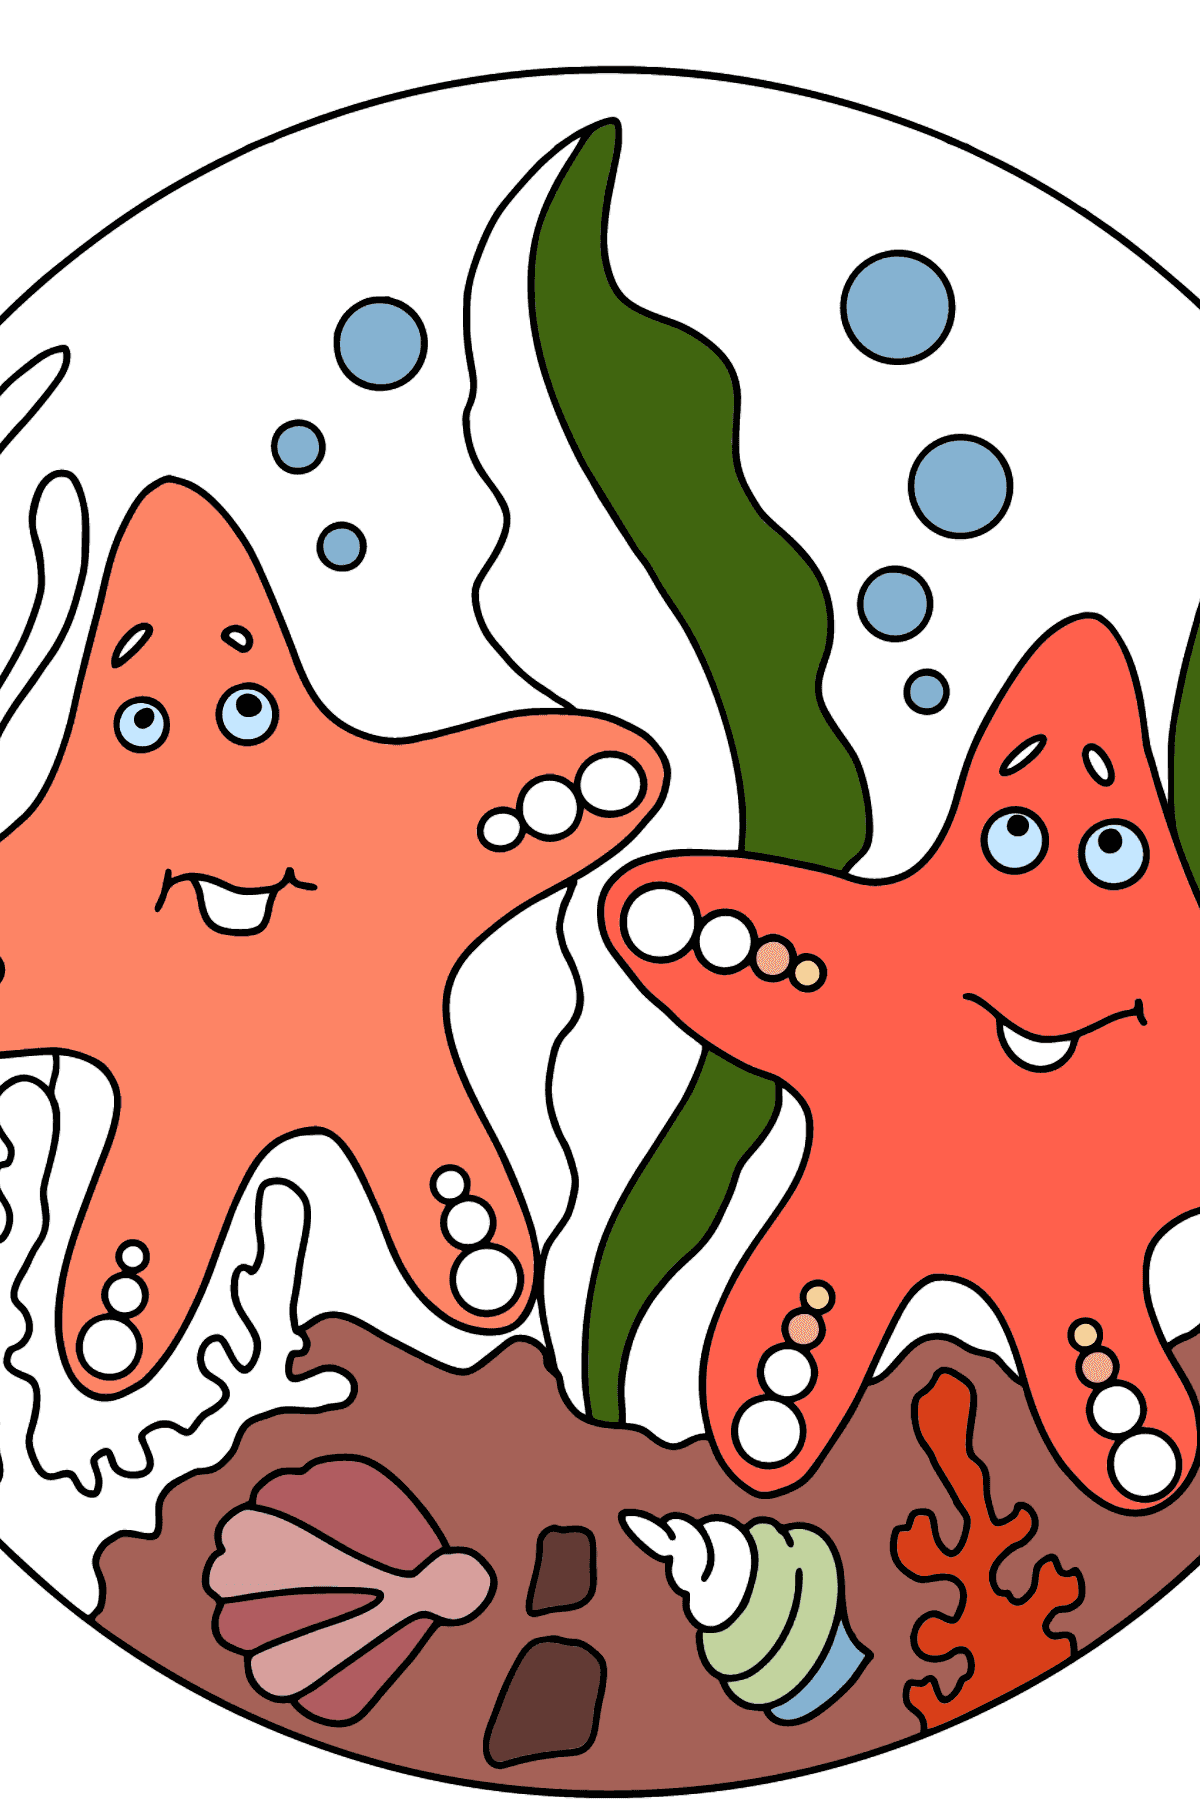 Two Starfish Coloring Page - Coloring Pages for Kids